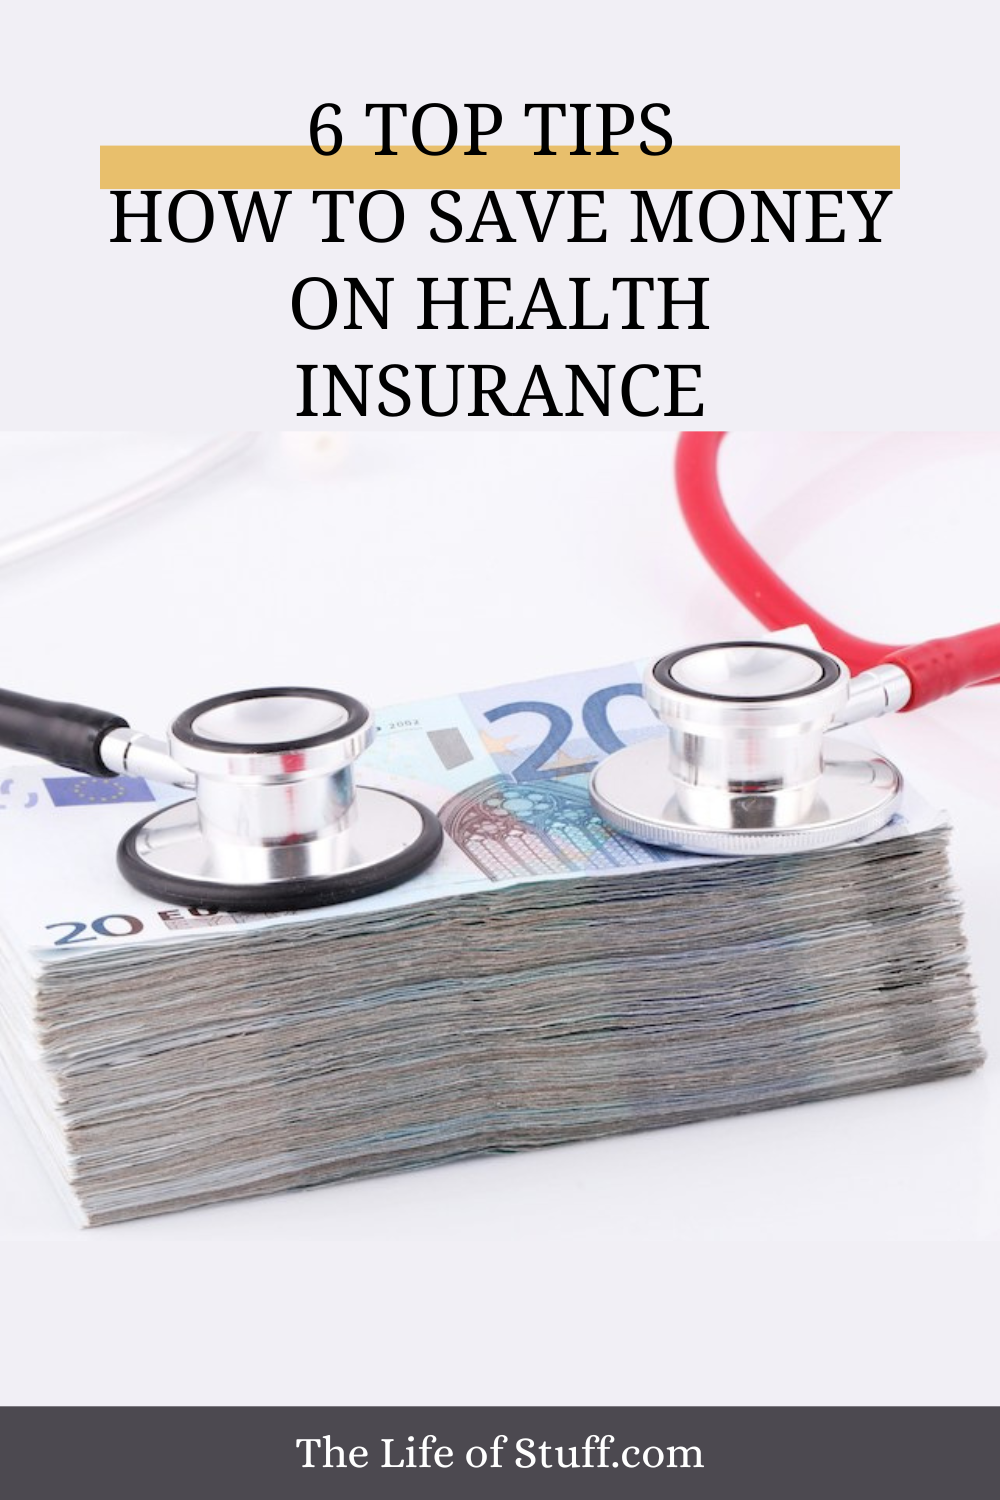 6 Top Tips - How to Save Money on Health Insurance - The Life of Stuff